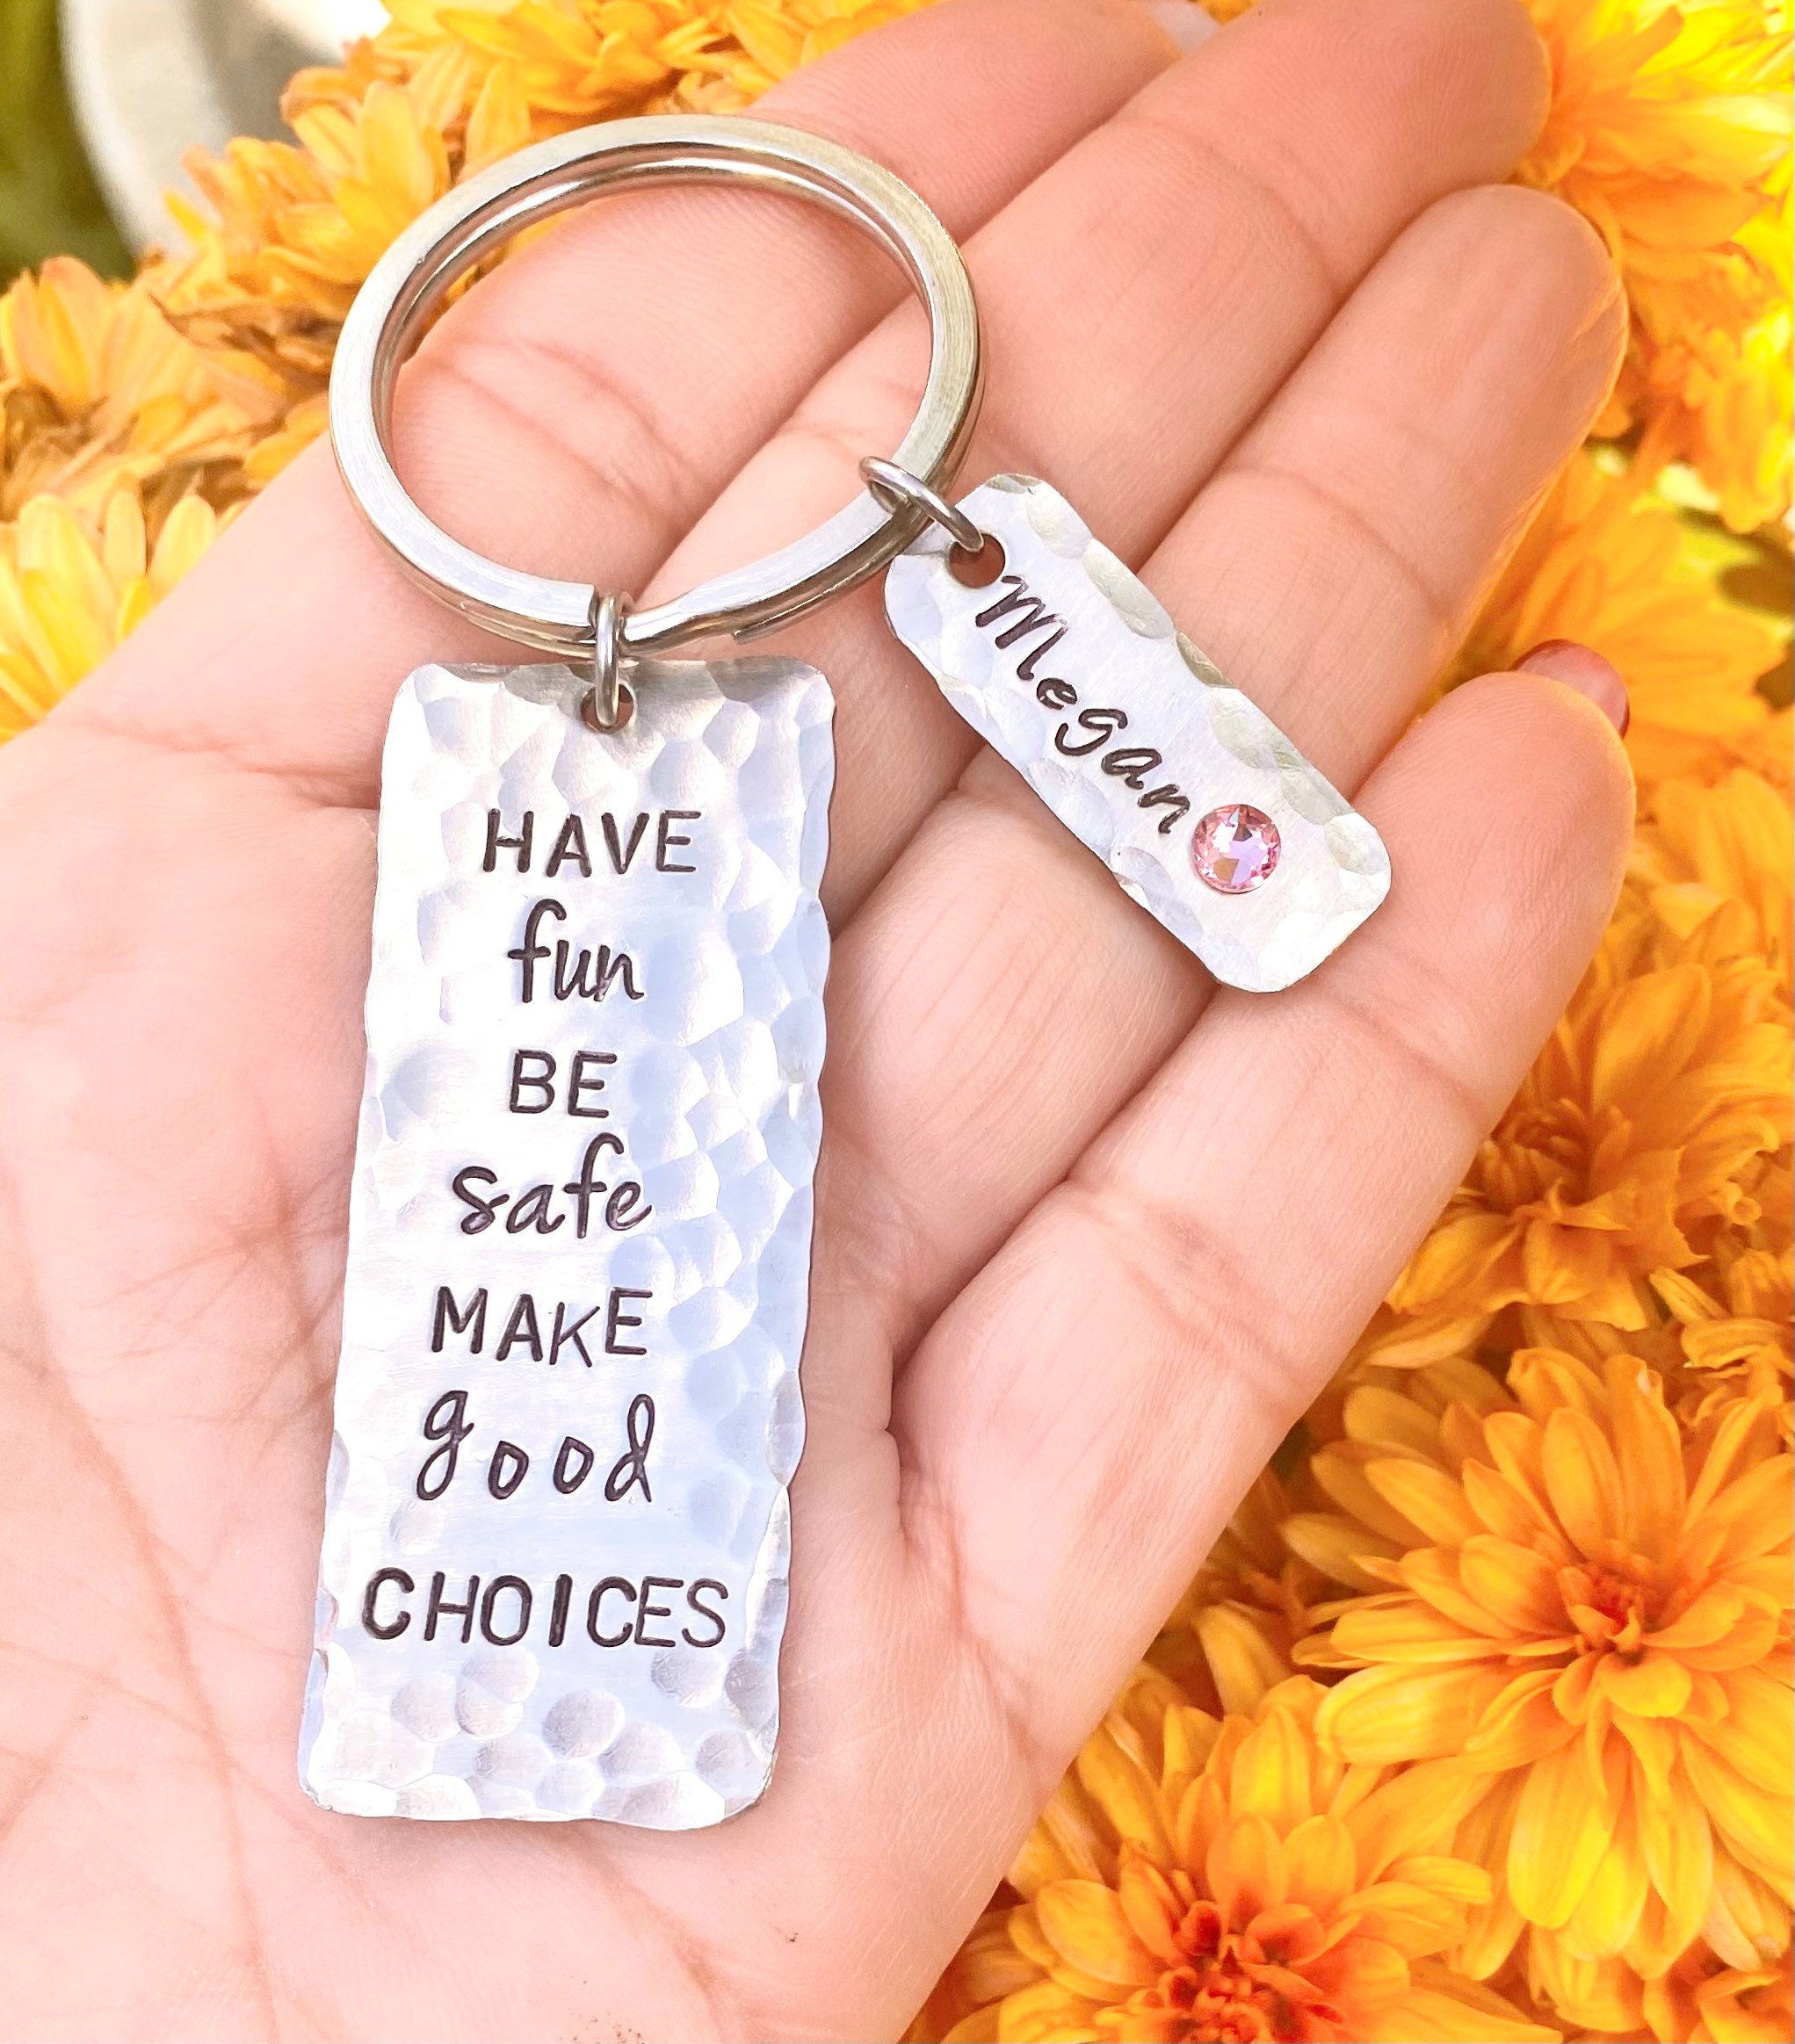 Call Your Family Keychain Ornament,new Driver Gifts,have Fun Be Safe Make  Good Choices Boy Girl Birday Key Chain Pendant